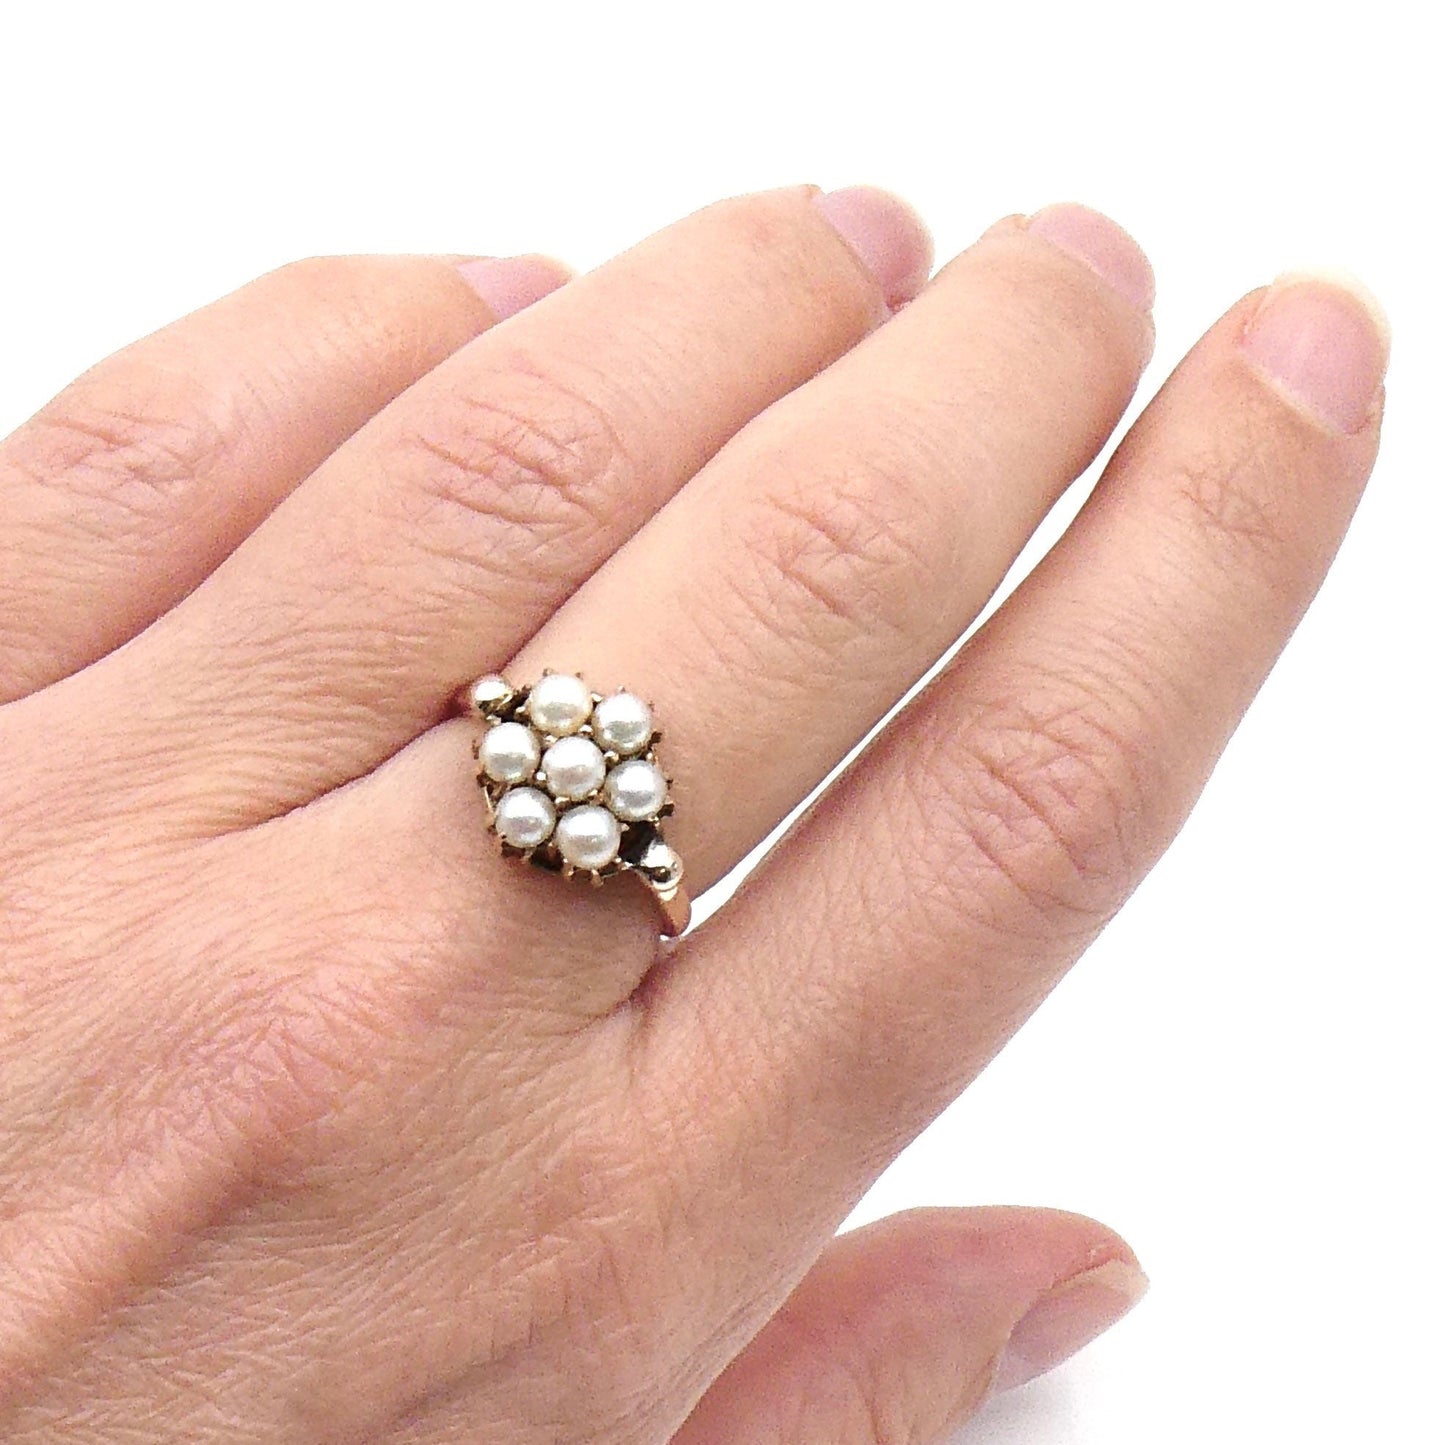 Vintage pearl ring, pearl cluster daisy ring, set in 9kt gold. - Collected